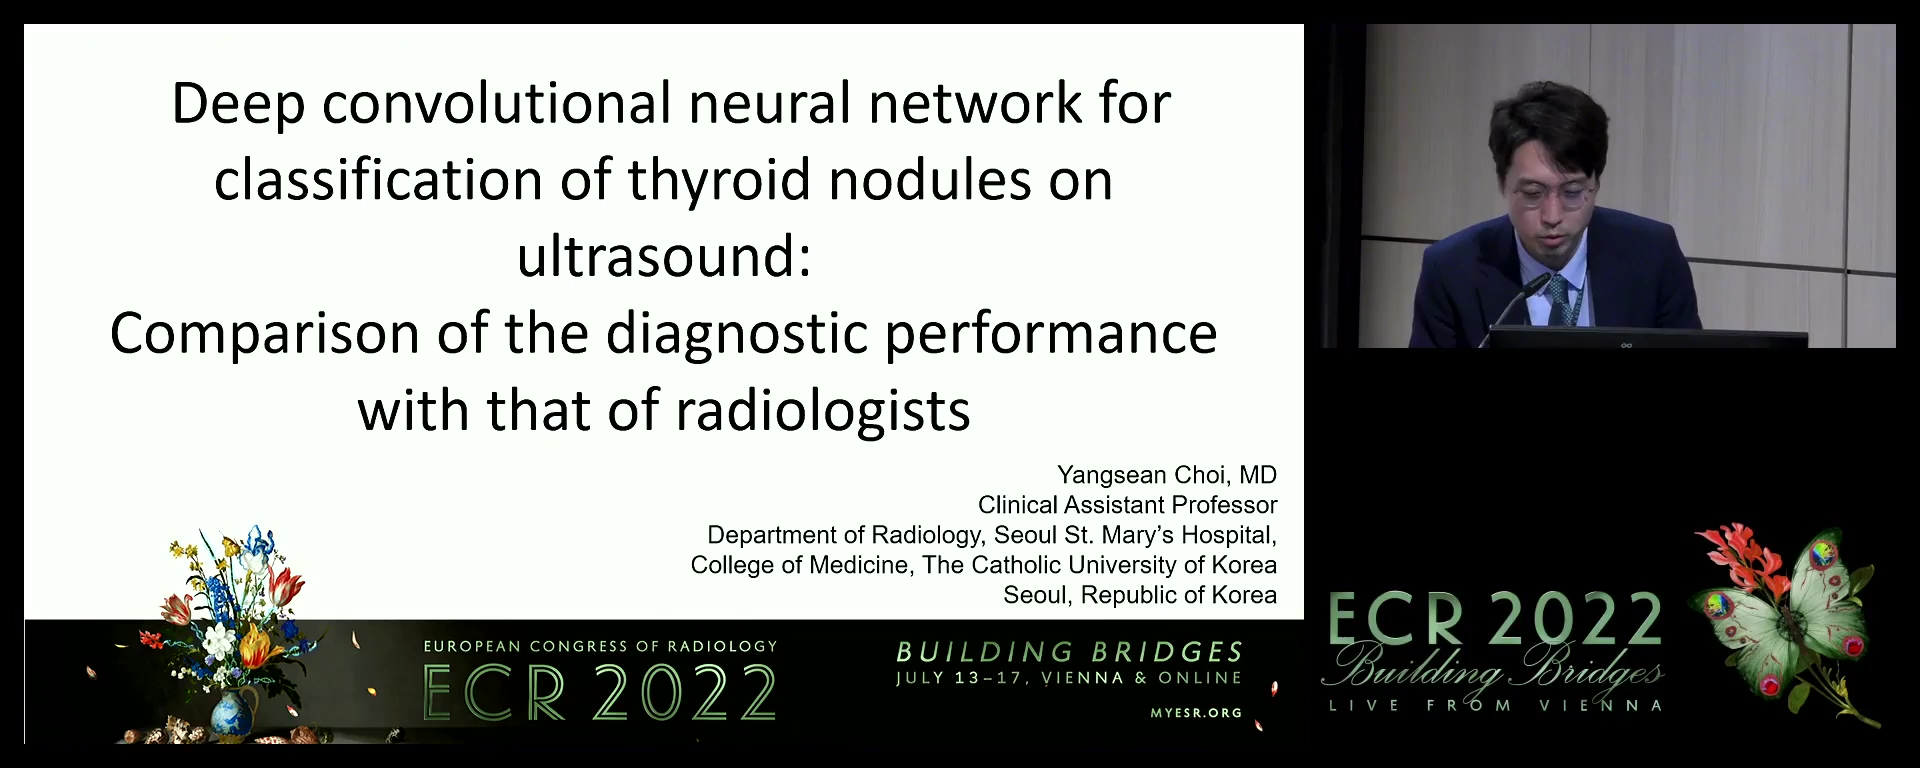 Deep convolutional neural network with transfer learning for automated classification of thyroid nodules on ultrasound